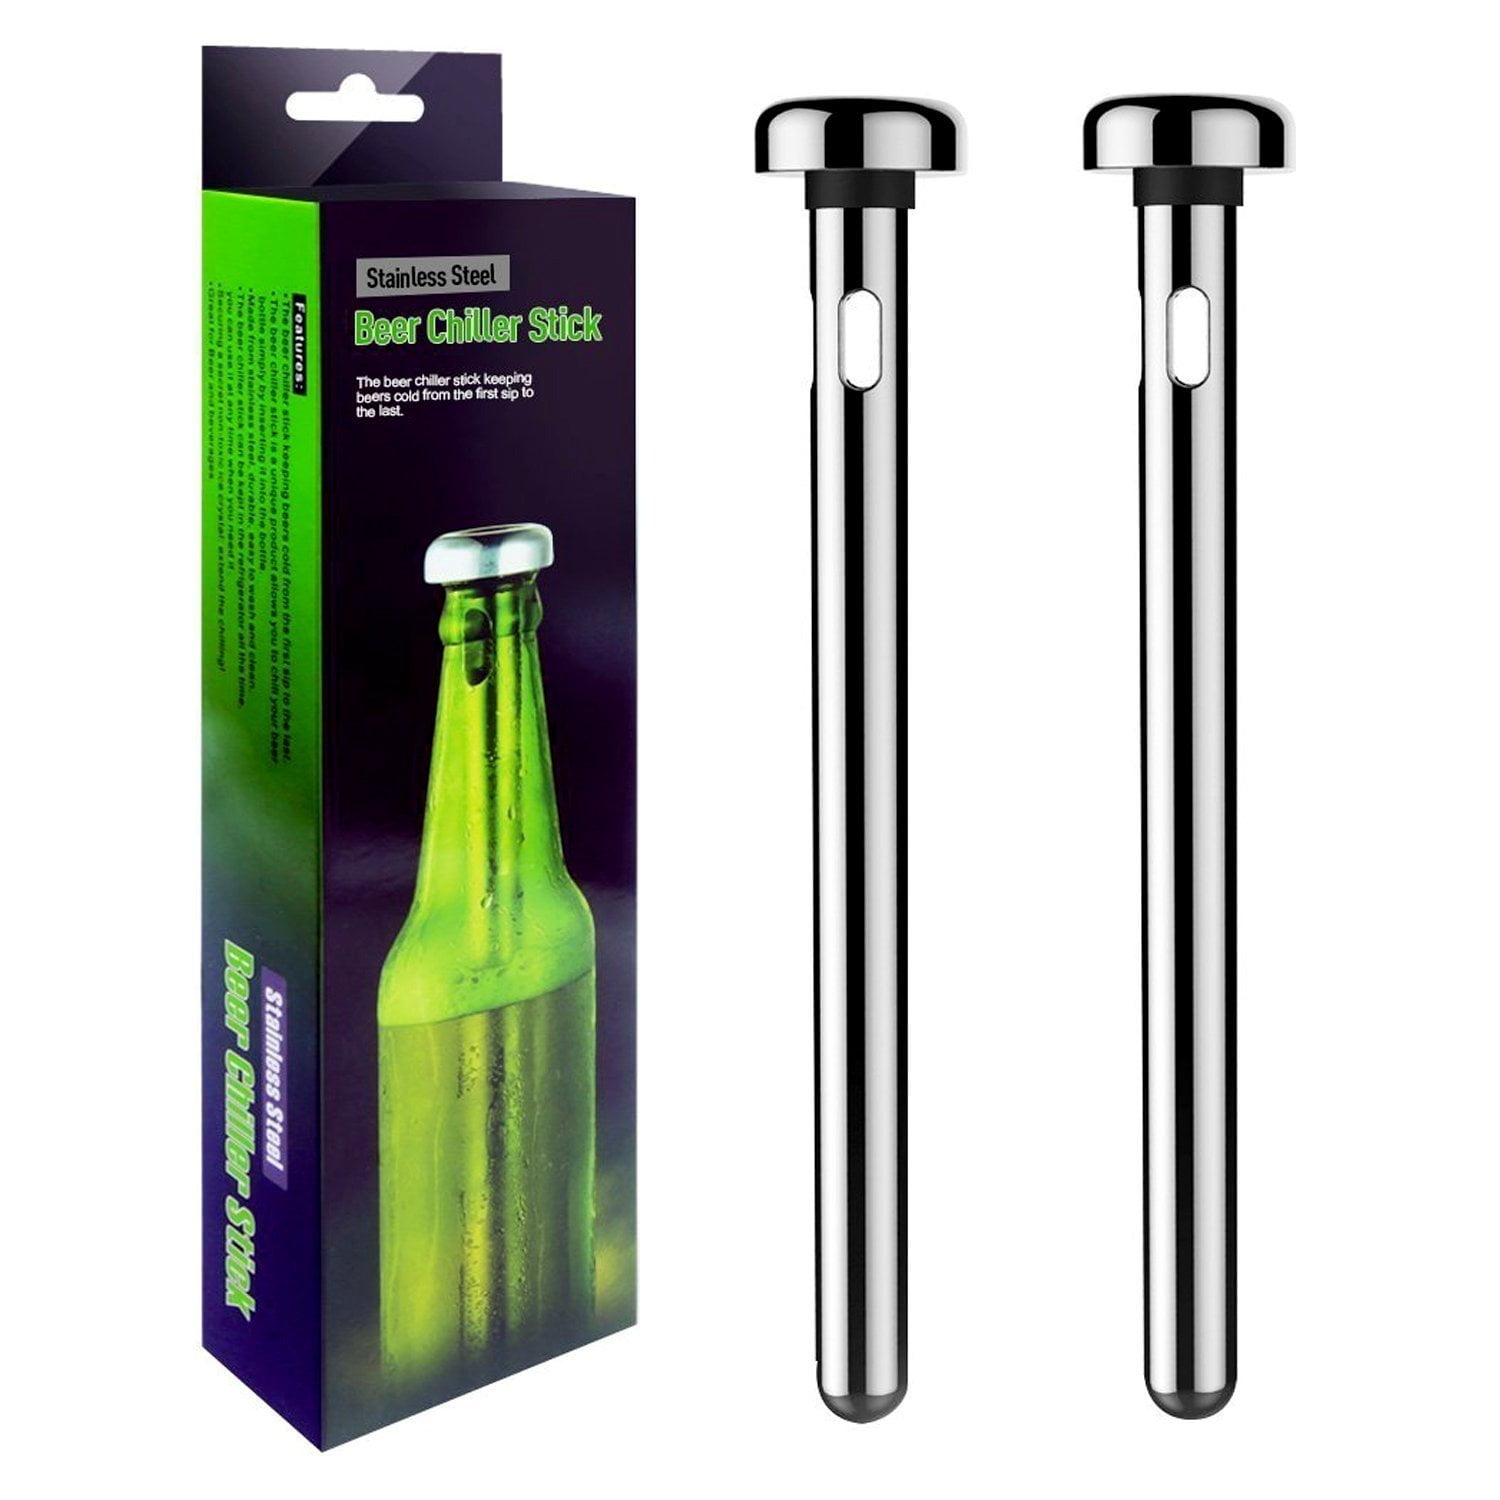 Stainless Steel Beer Chiller Stick Beer Chiller Stick Portable Beverage  Cooling Ice Cooler Beer Kitchen Tools Party Supplies - AliExpress